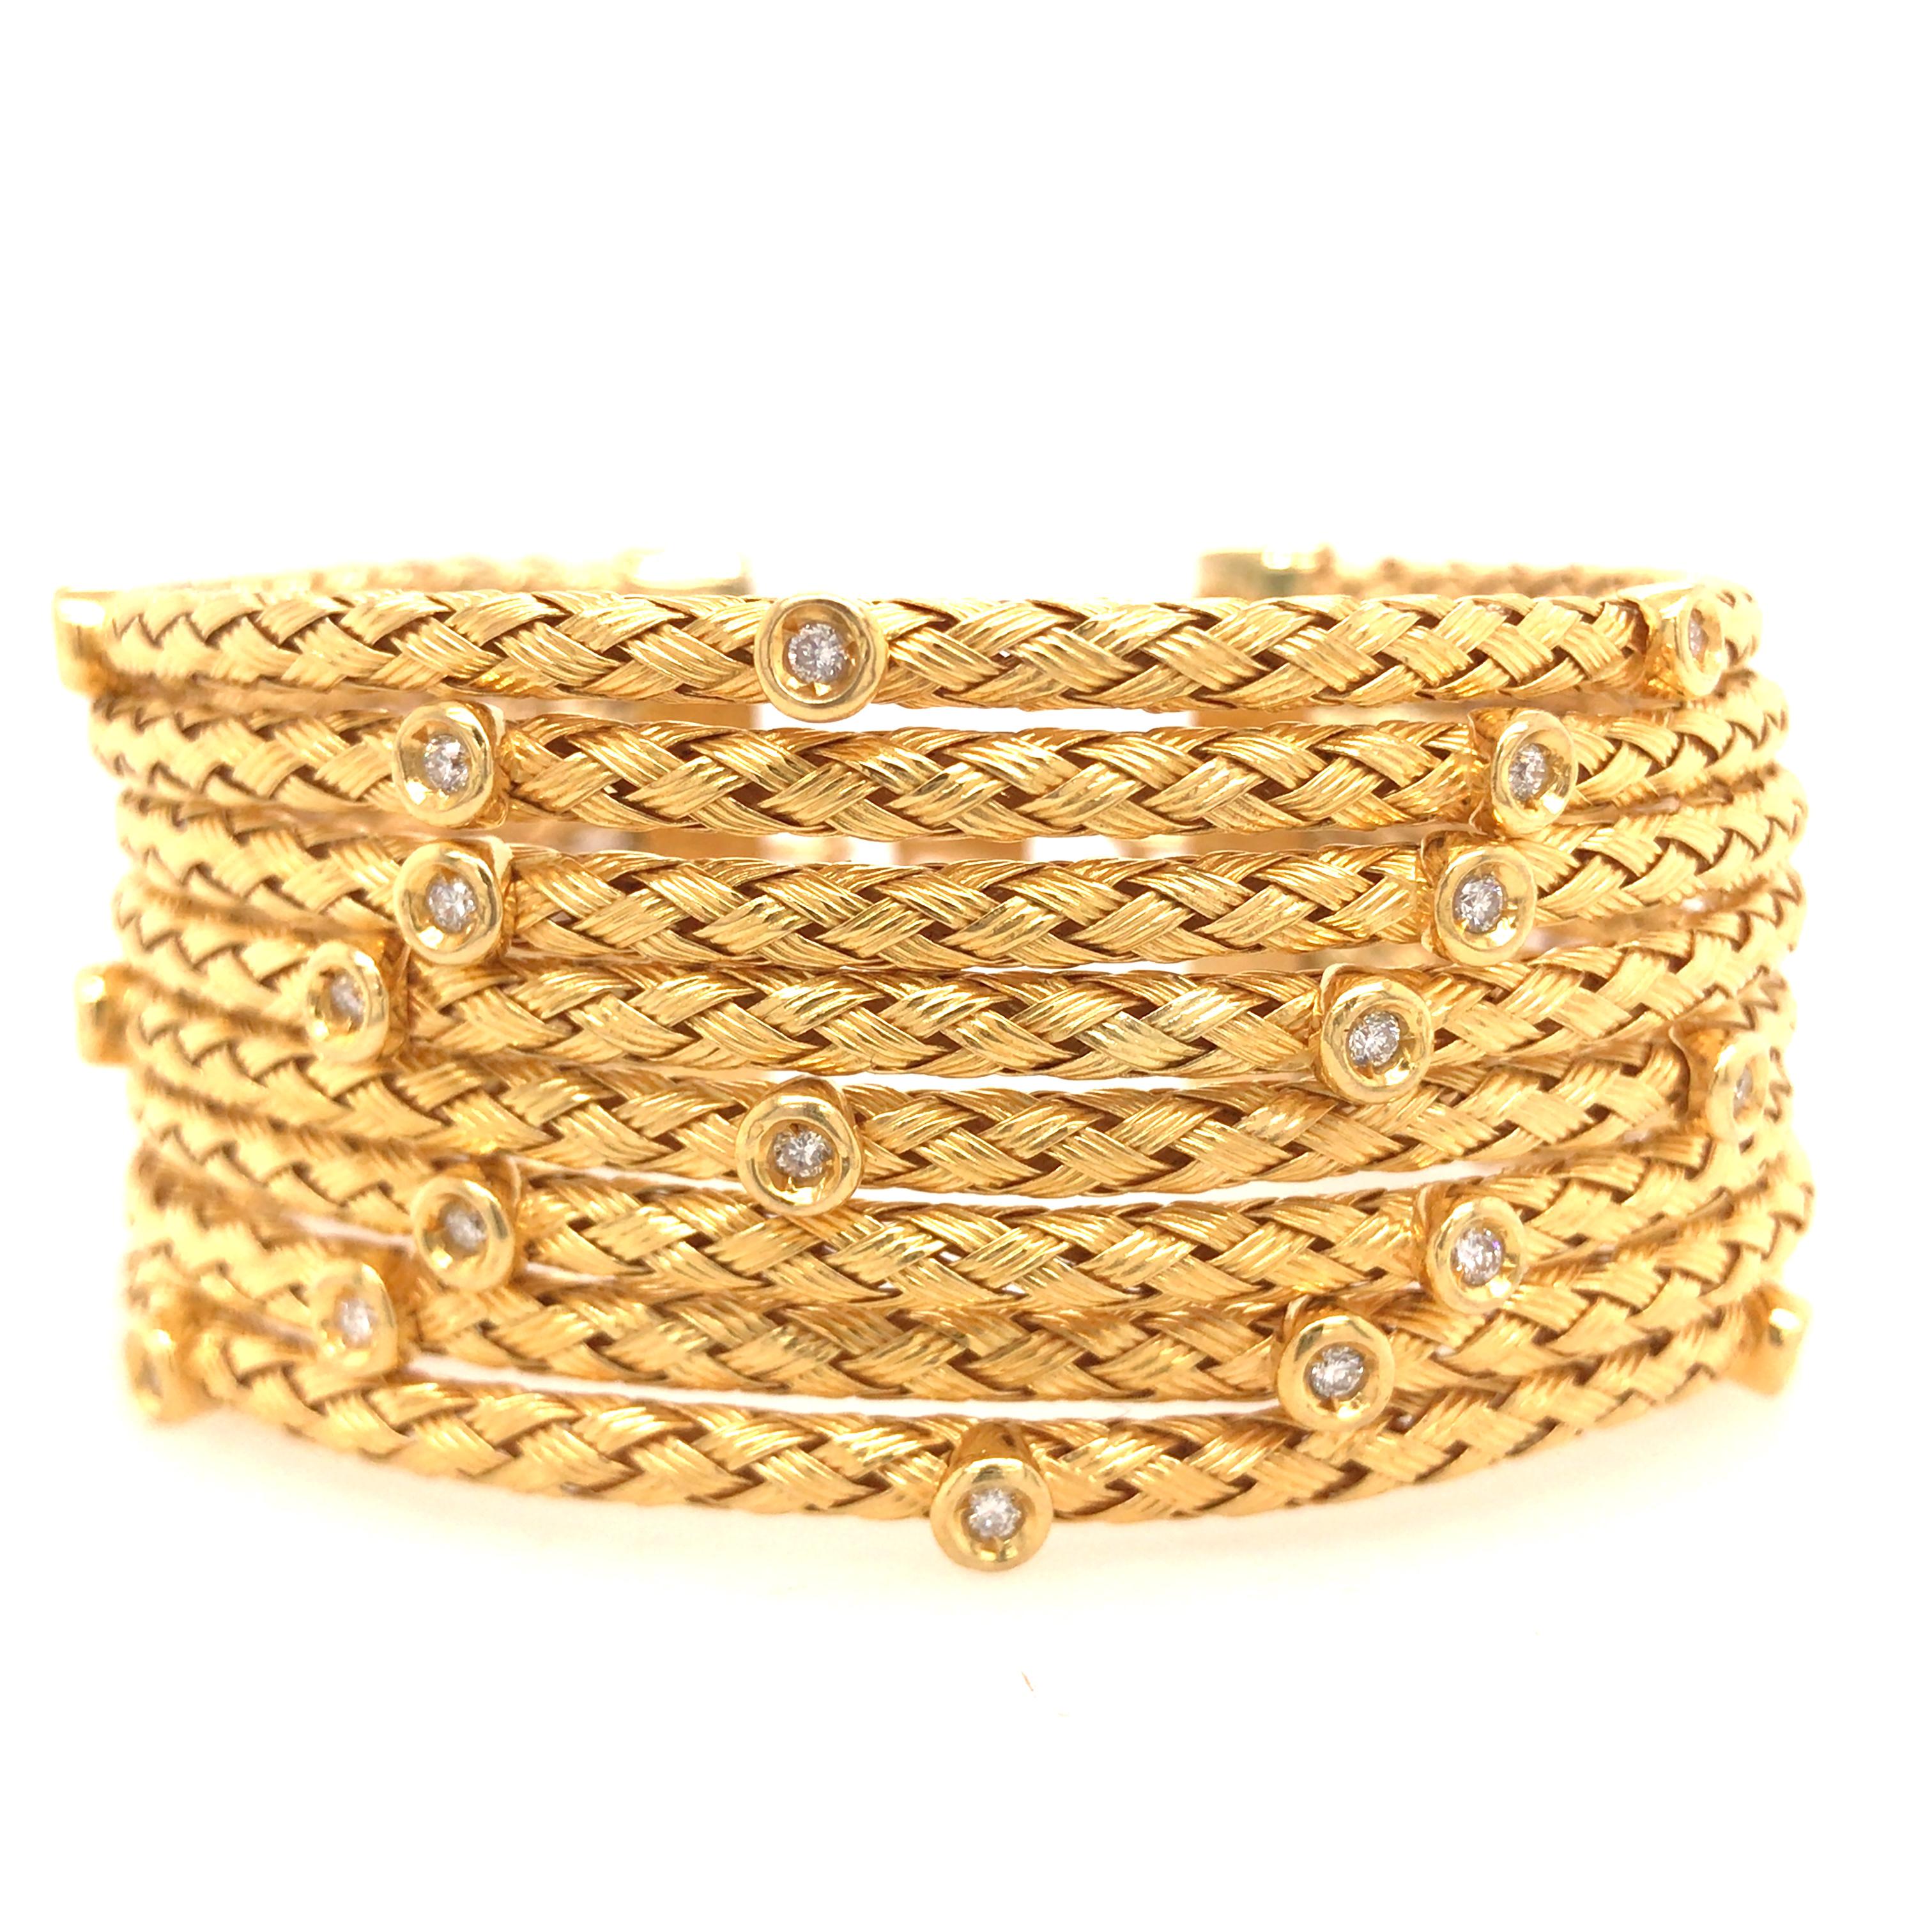 18K Yellow Gold Wide (8) Row Rope Bangle with Diamonds. (20) Round Brilliant Cut Diamonds weighing 0.88 carat total weight, G-H in color and VS-SI in clarity are expertly Bezel set on the Gold Ropes. The Bracelet is flexible and measures 6 1/4 inch